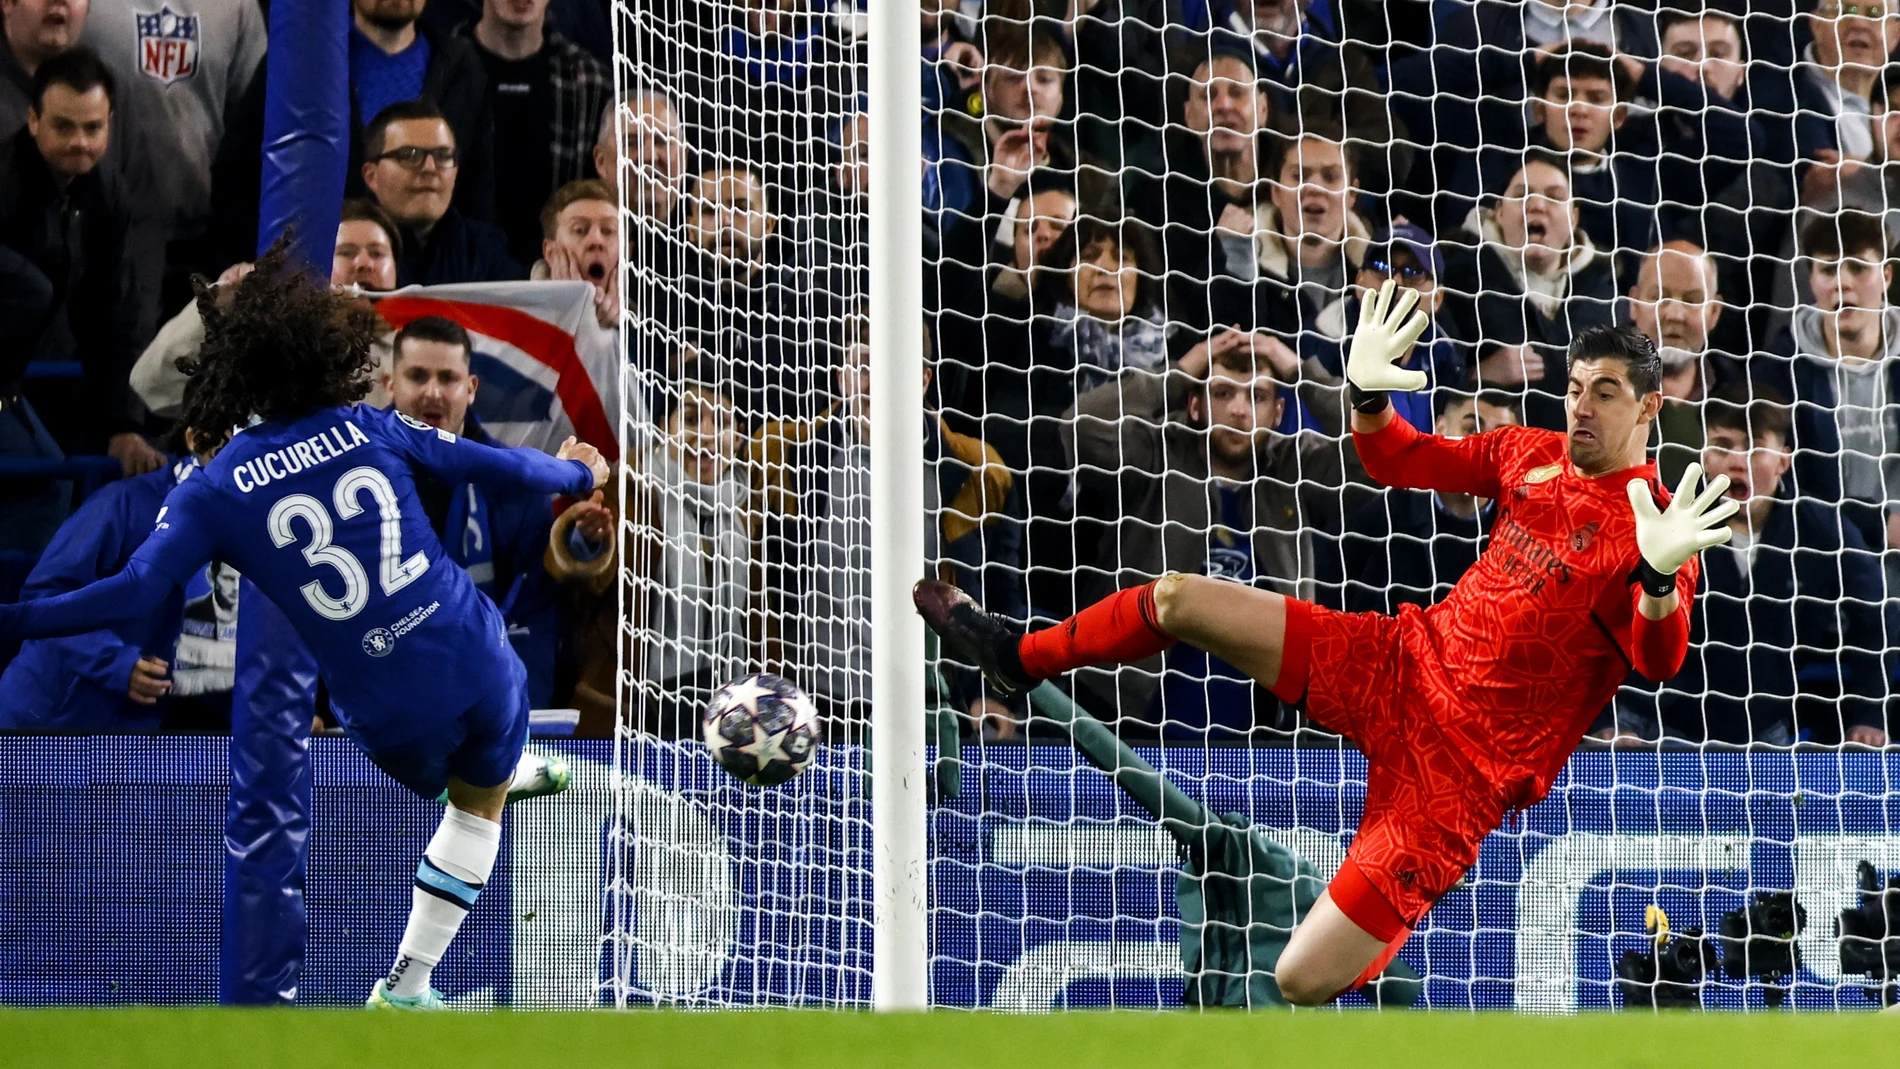 London (United Kingdom), 18/04/2023.- Real Madrid's goalkeeper Thibaut Courtois (R) in action against Marc Cucurella of Chelsea (L) during the UEFA Champions League quarter final, 2nd leg match between Chelsea and Real Madrid in London, Britain, 18 April 2023. (Liga de Campeones, Reino Unido, Londres) EFE/EPA/TOLGA AKMEN